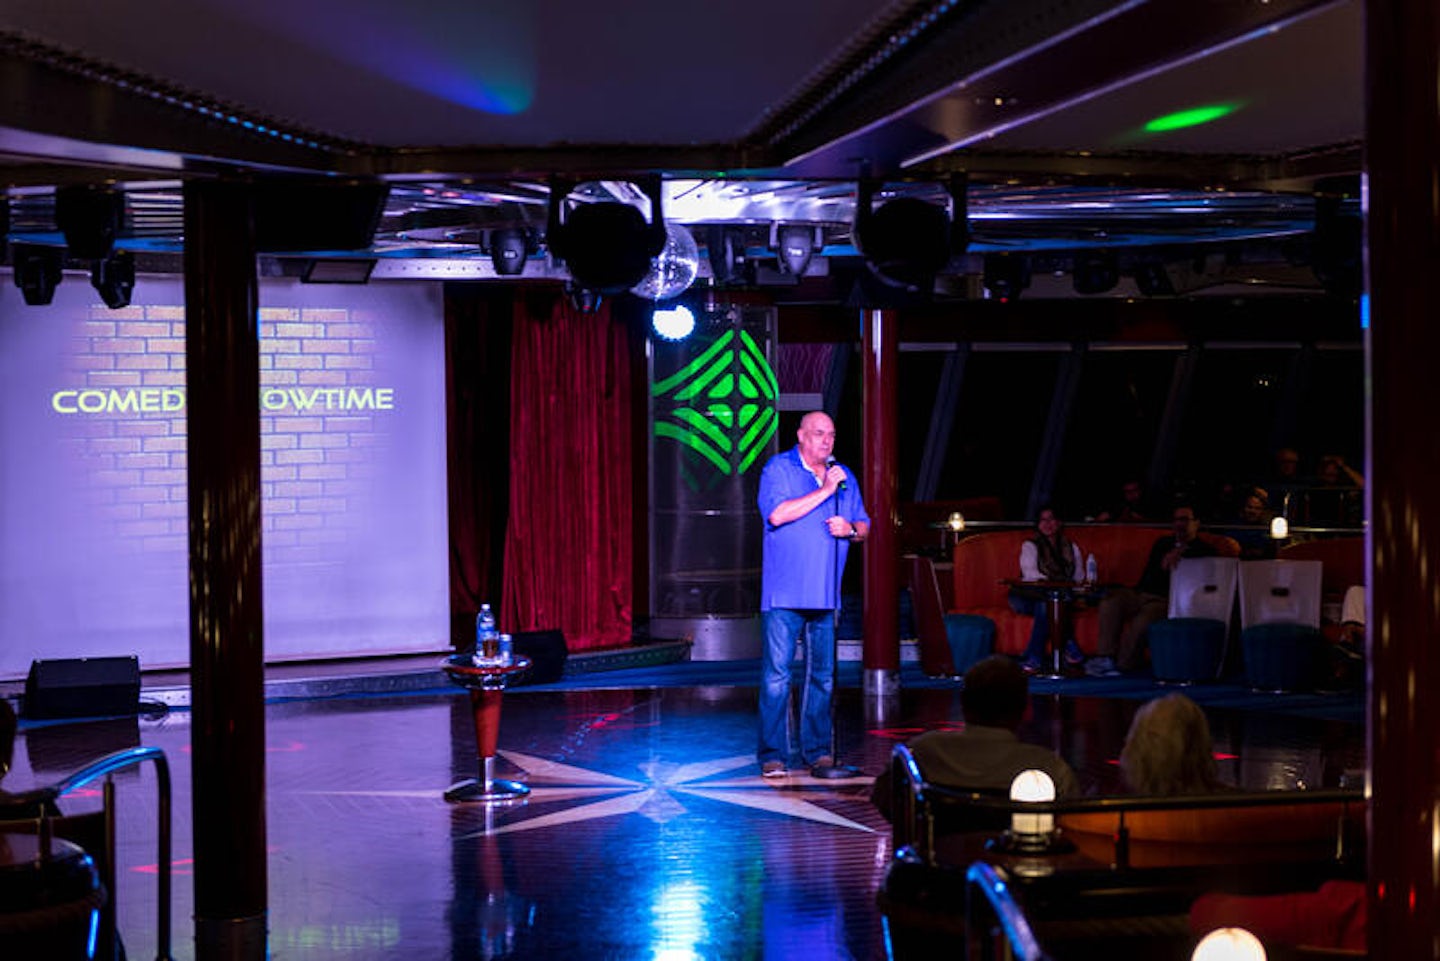 Adult Comedy Show at Spinnaker Lounge on Norwegian Pearl